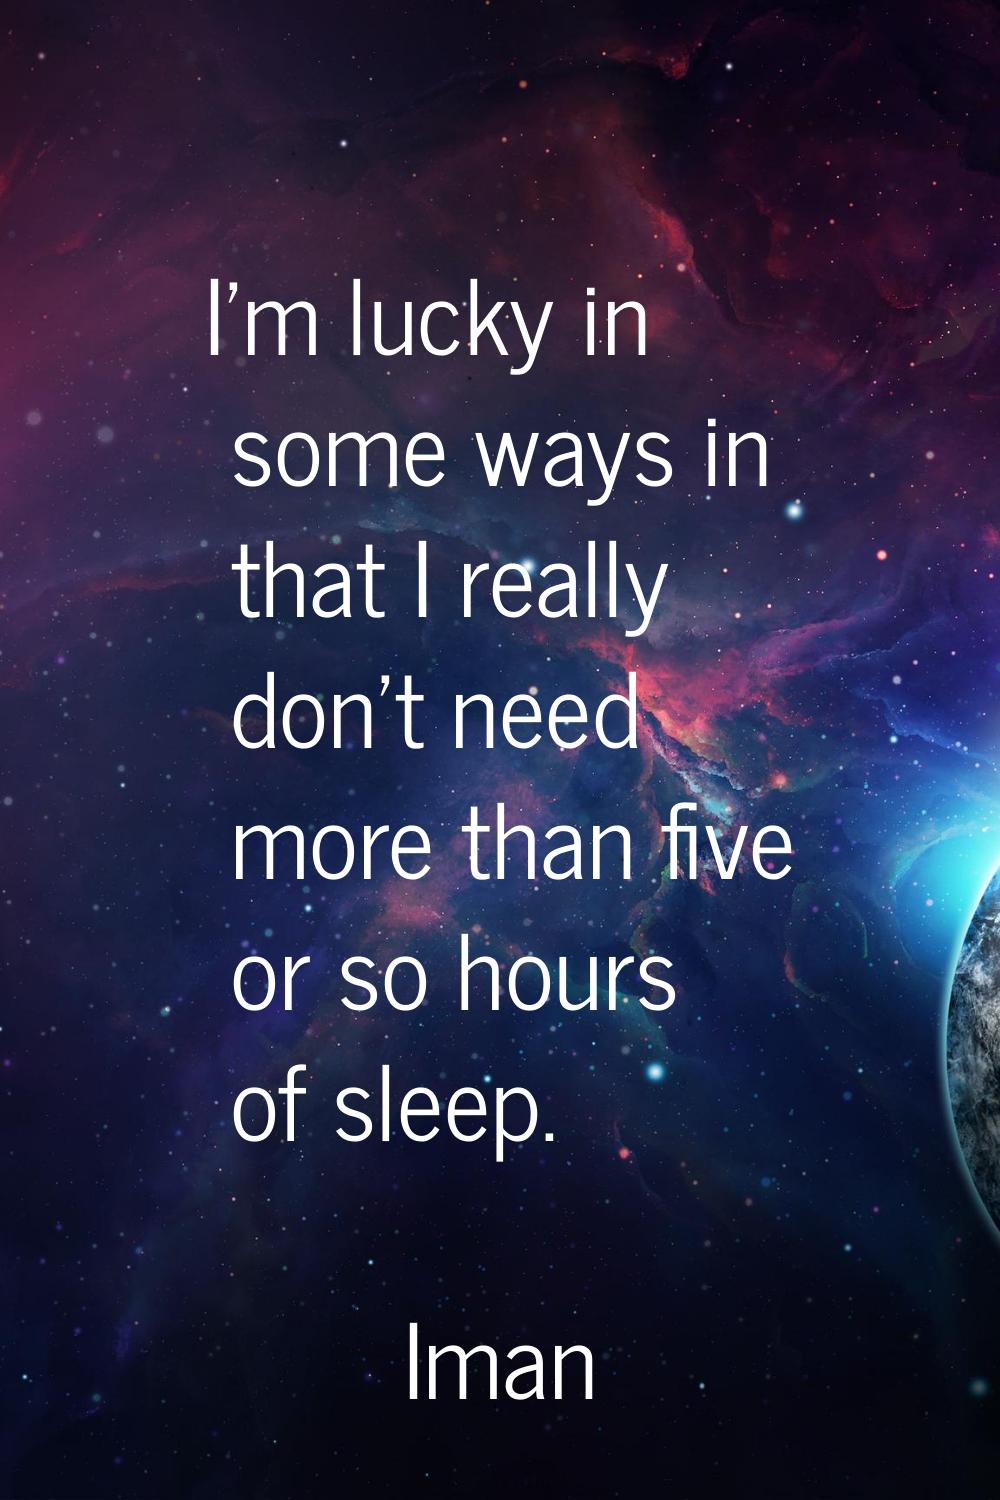 I'm lucky in some ways in that I really don't need more than five or so hours of sleep.